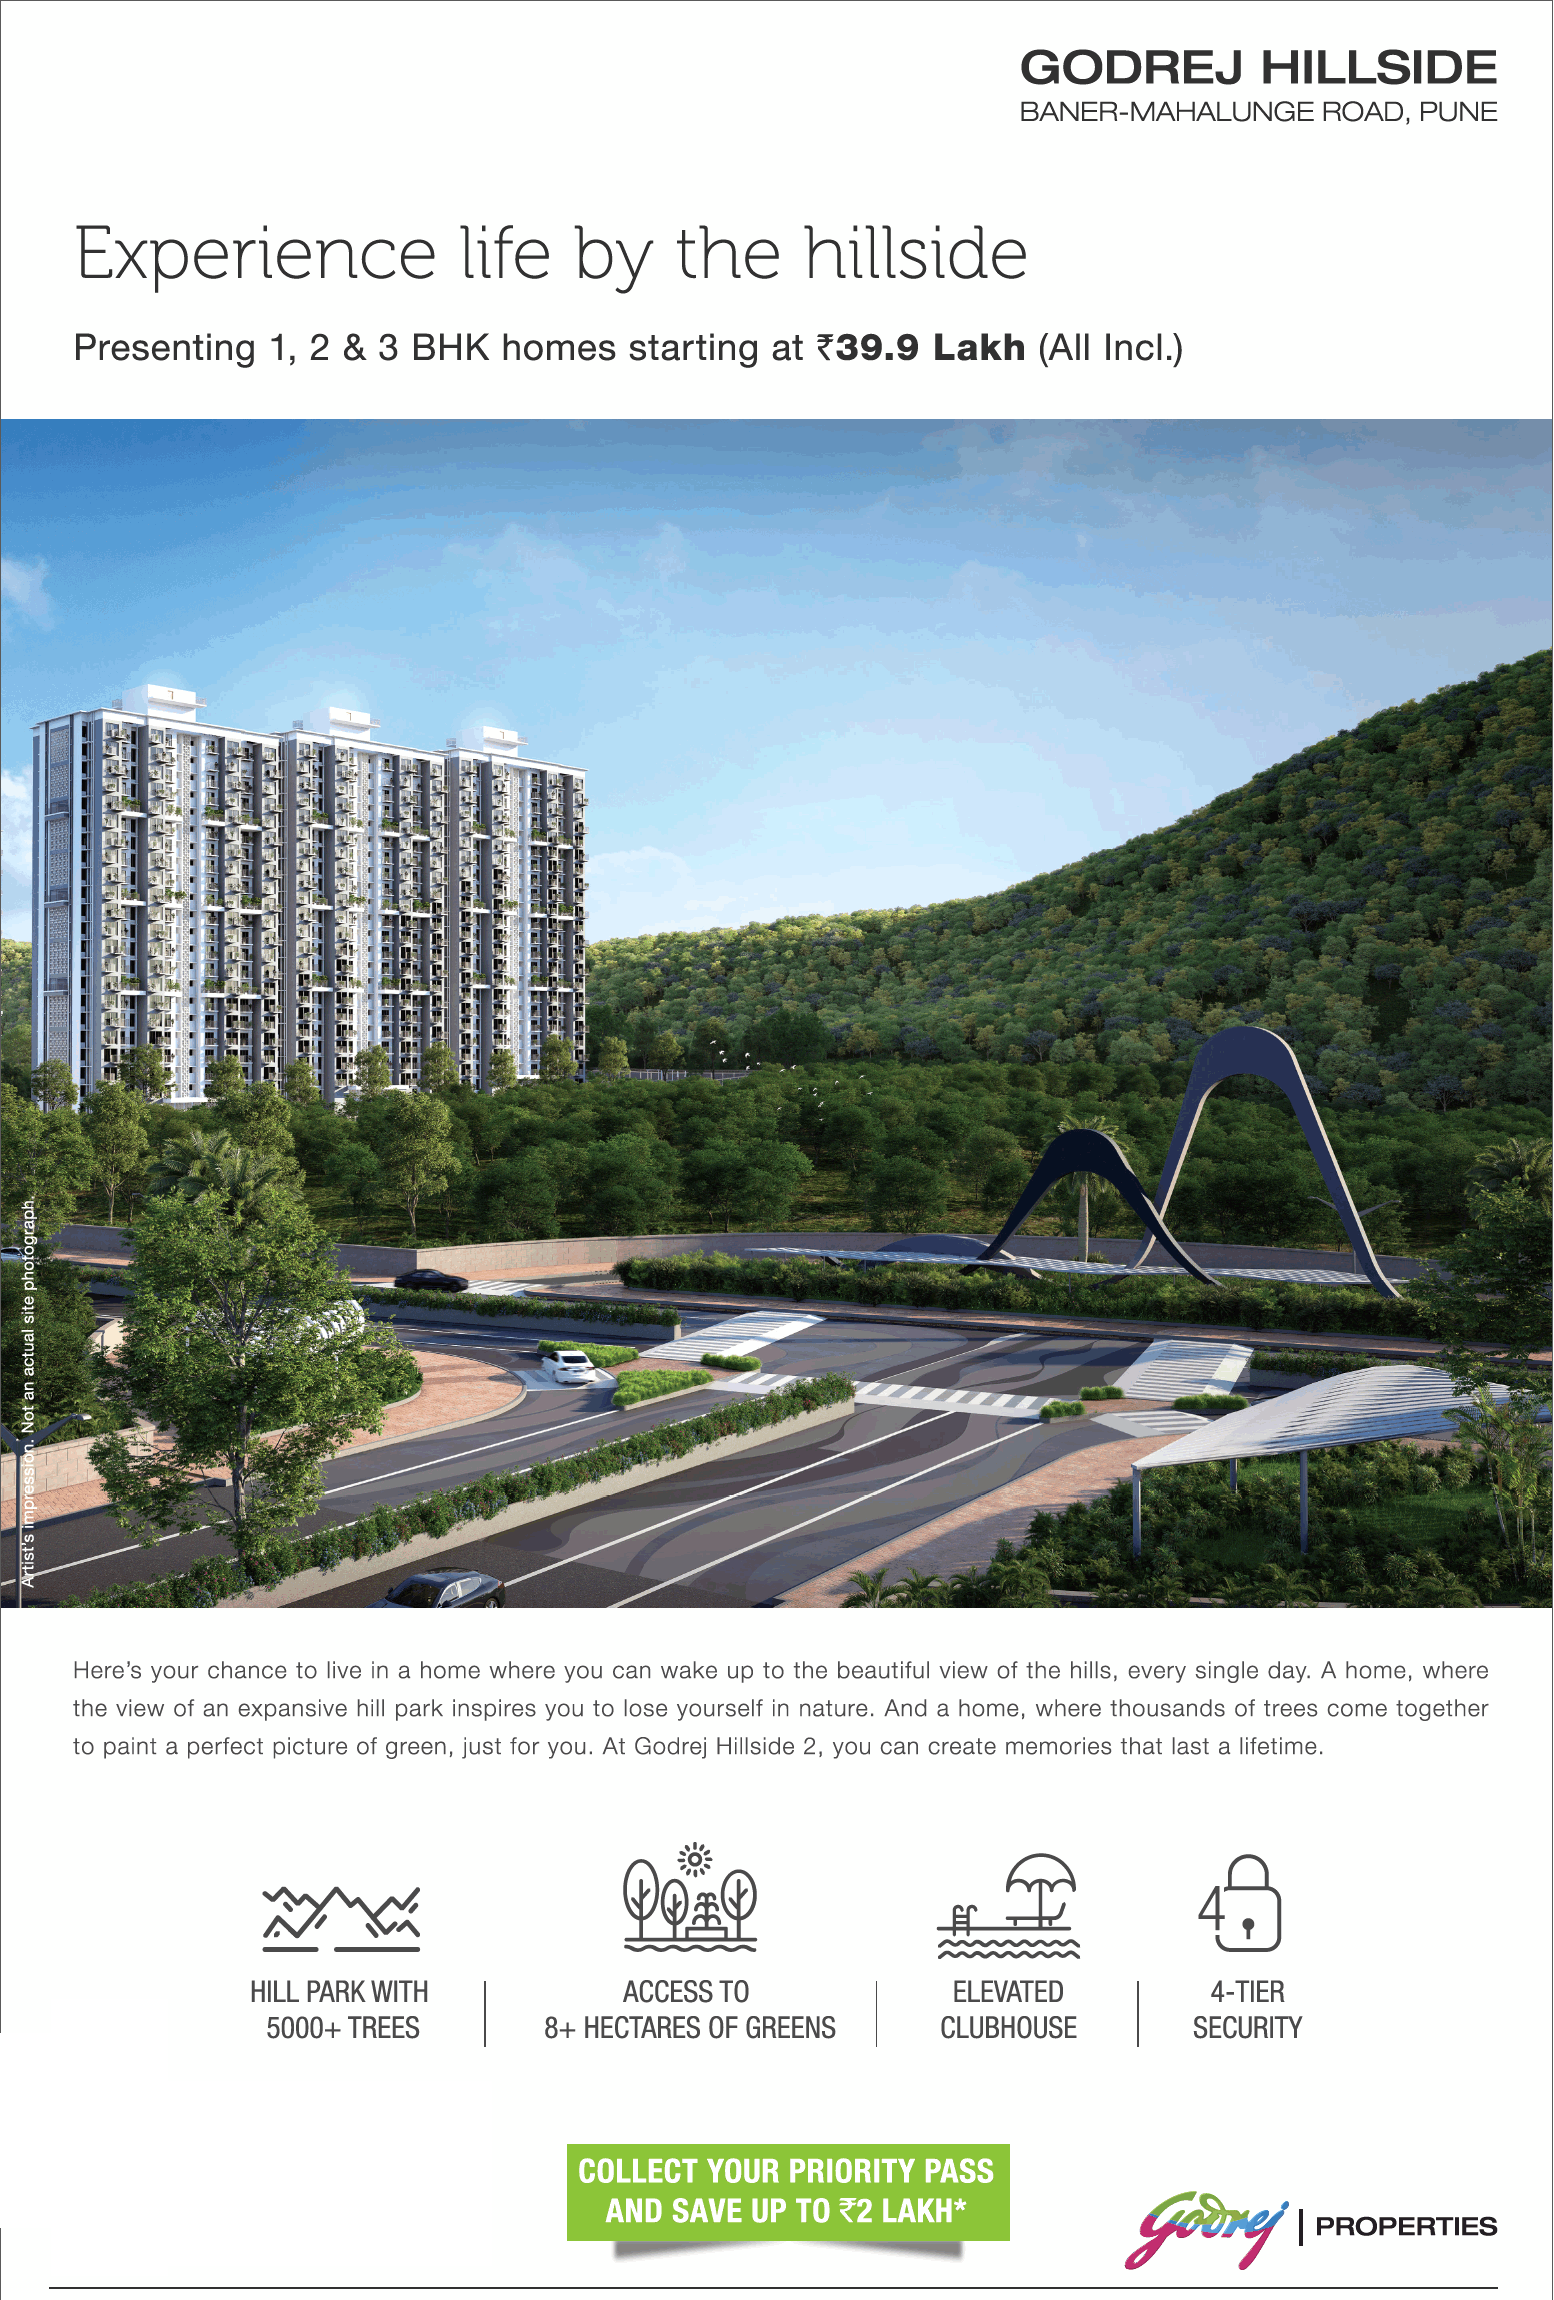 Presenting 1, 2 and 3 BHK homes starting at Rs 39.9 Lakh at Godrej Hillside in Pune Update